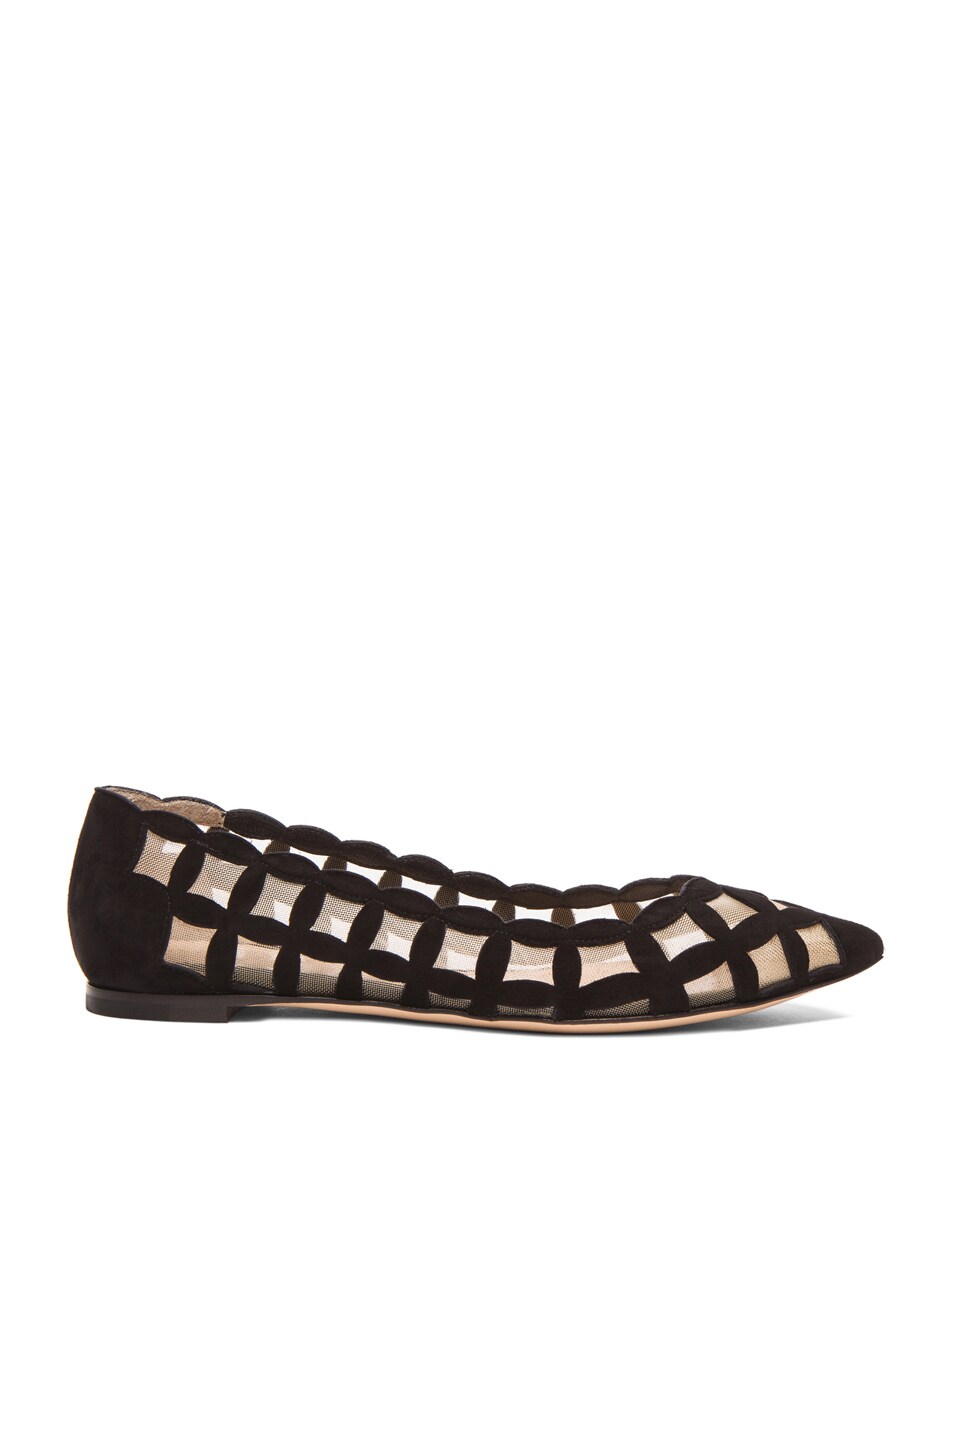 Image 1 of Gianvito Rossi Mesh Flats in Black & Nude Suede